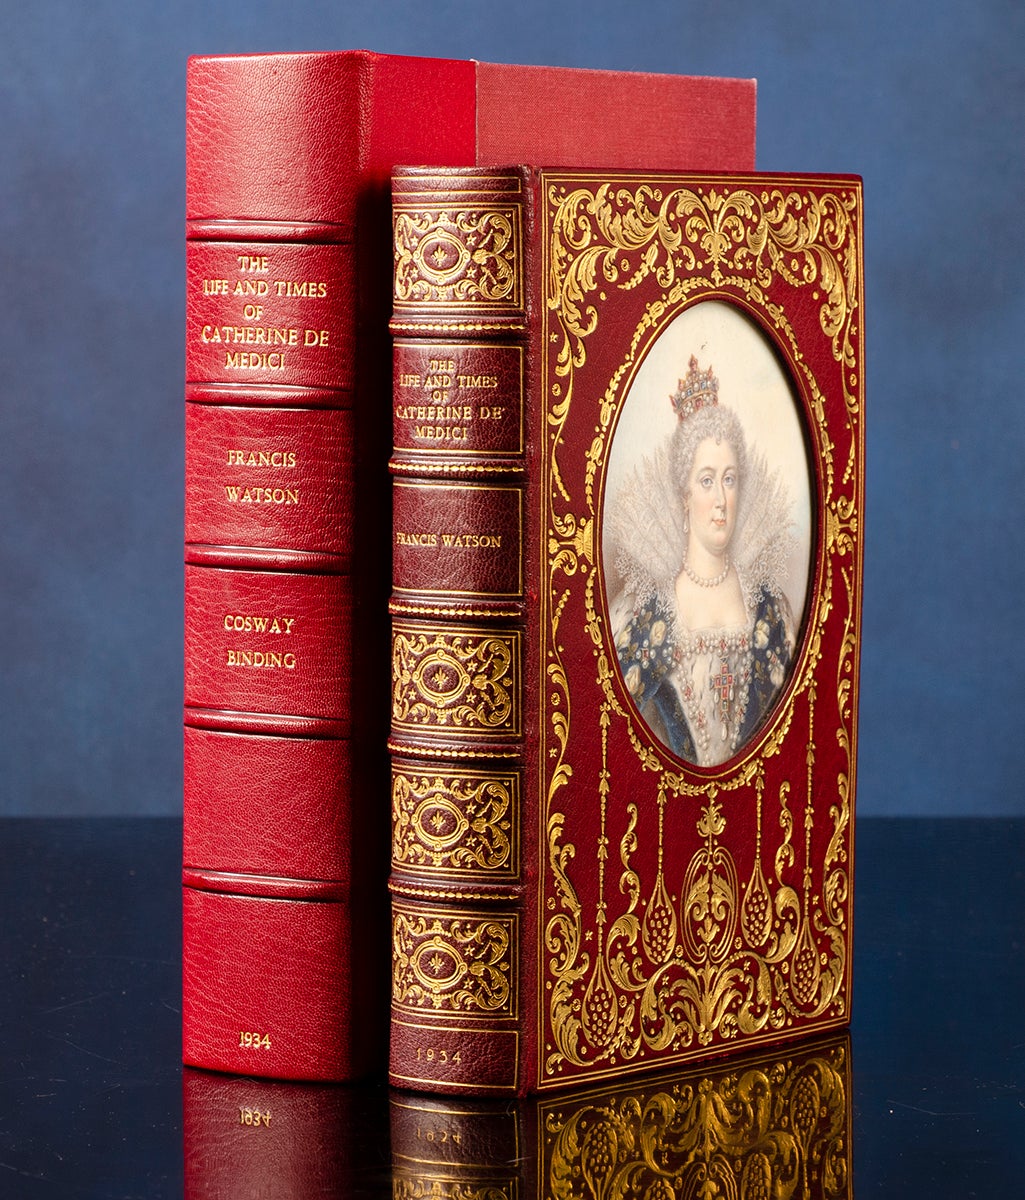 COSWAY BINDING; RIVIRE & SON, binders; [MISS C.B. CURRIE], miniaturist; WATSON, Francis - Life and Times of Catherine de' Medici, the